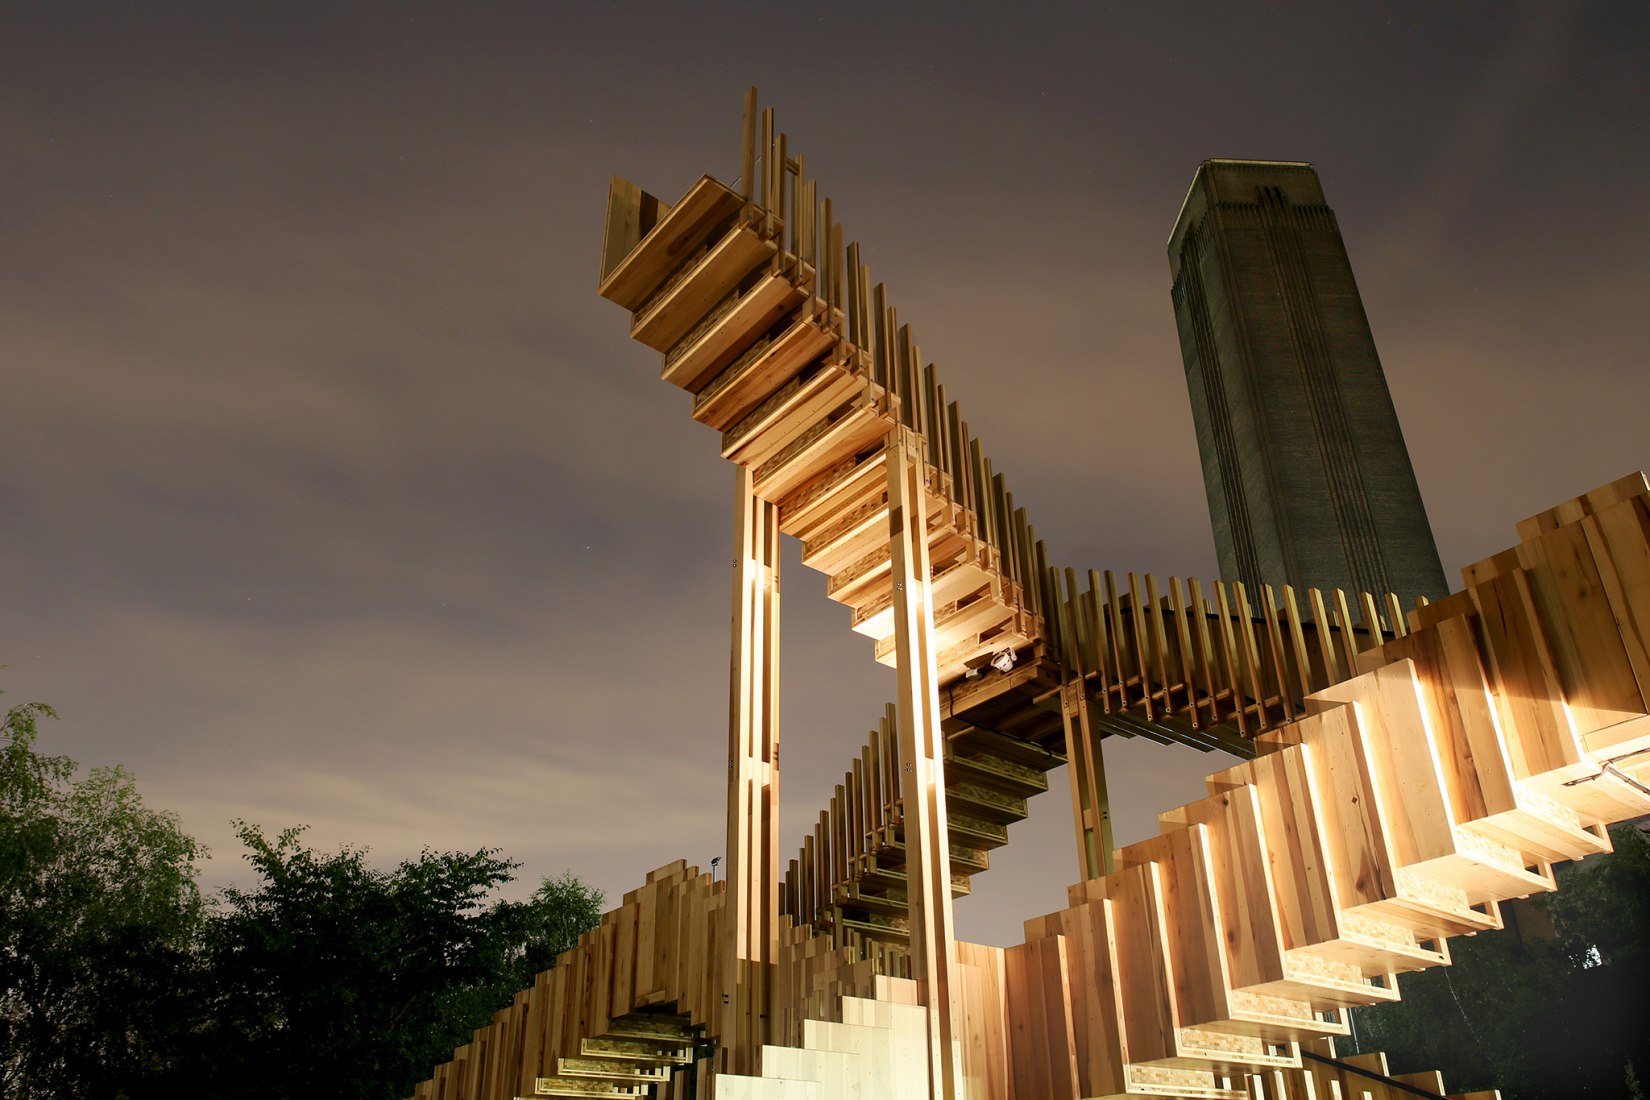 Opening weekend. Endless Stair by Rijke Marsh Morgan Architects (dRMM), London. Photography © Judith Stichtenoth.